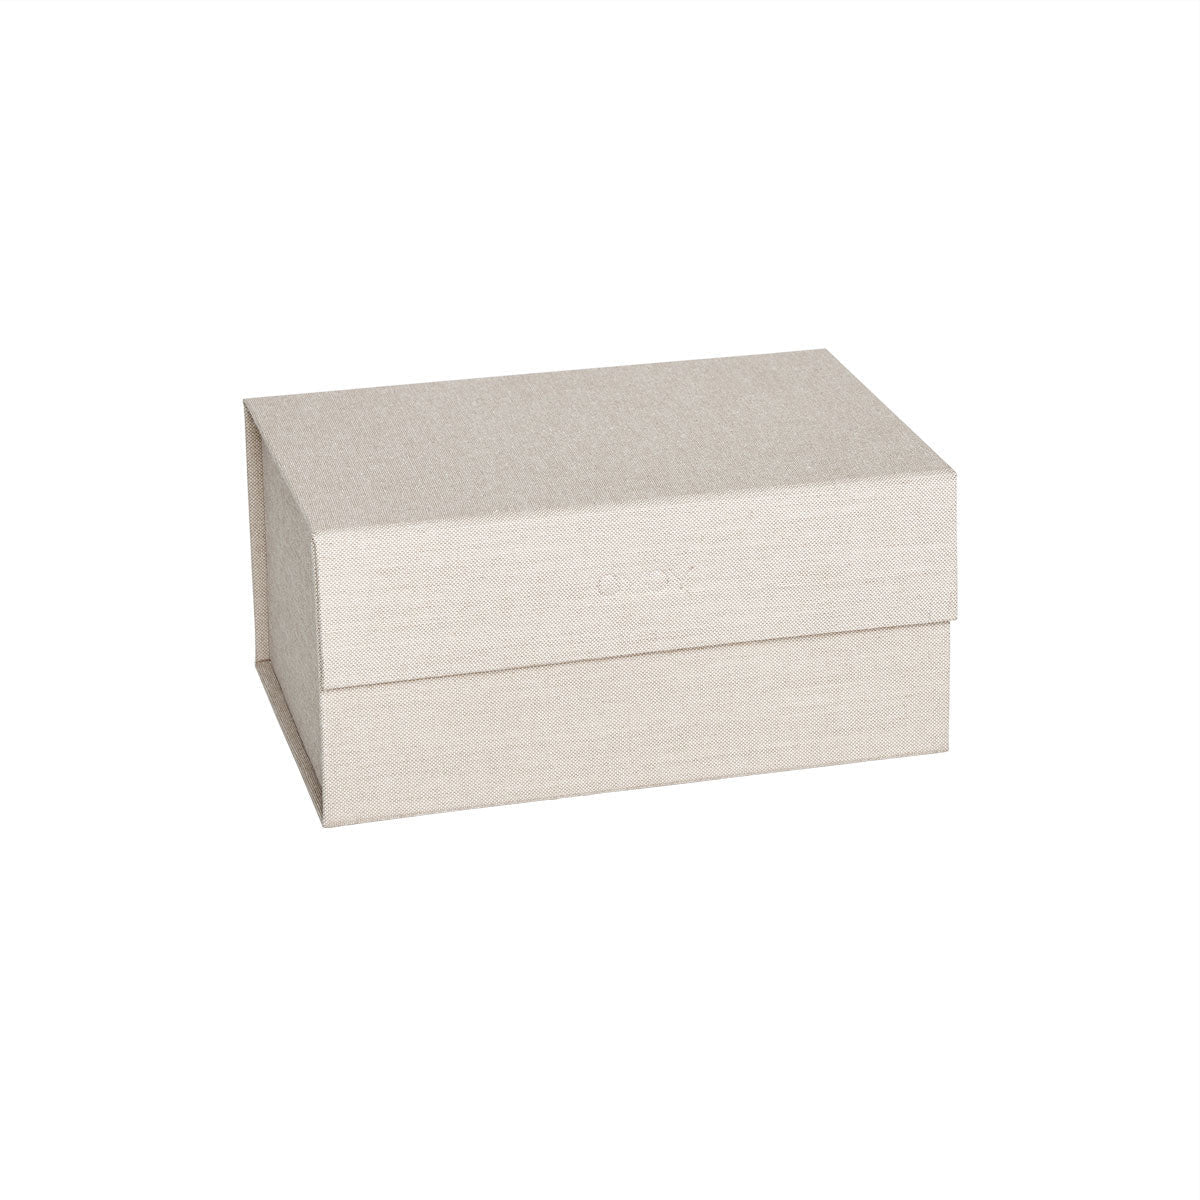 Load image into Gallery viewer, OYOY LIVING Hako Storages Box - A5 Storage 306 Clay Melange
